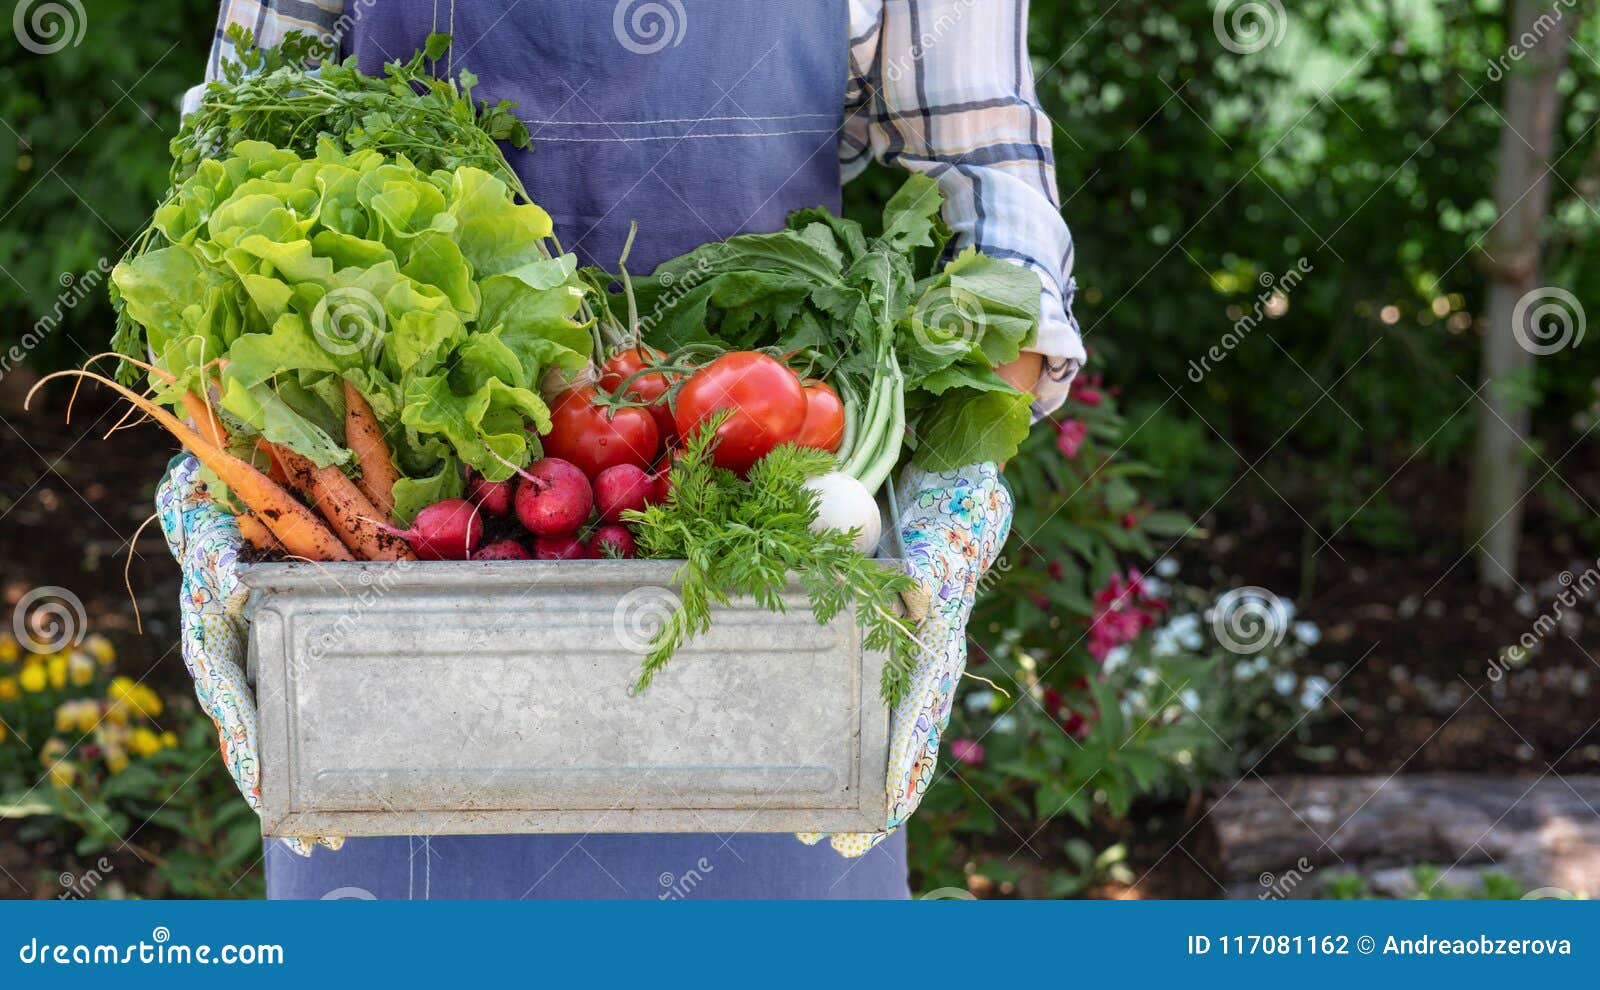 unrecognisable female farmer holding crate full of freshly harvested vegetables in her garden. homegrown bio produce concept.